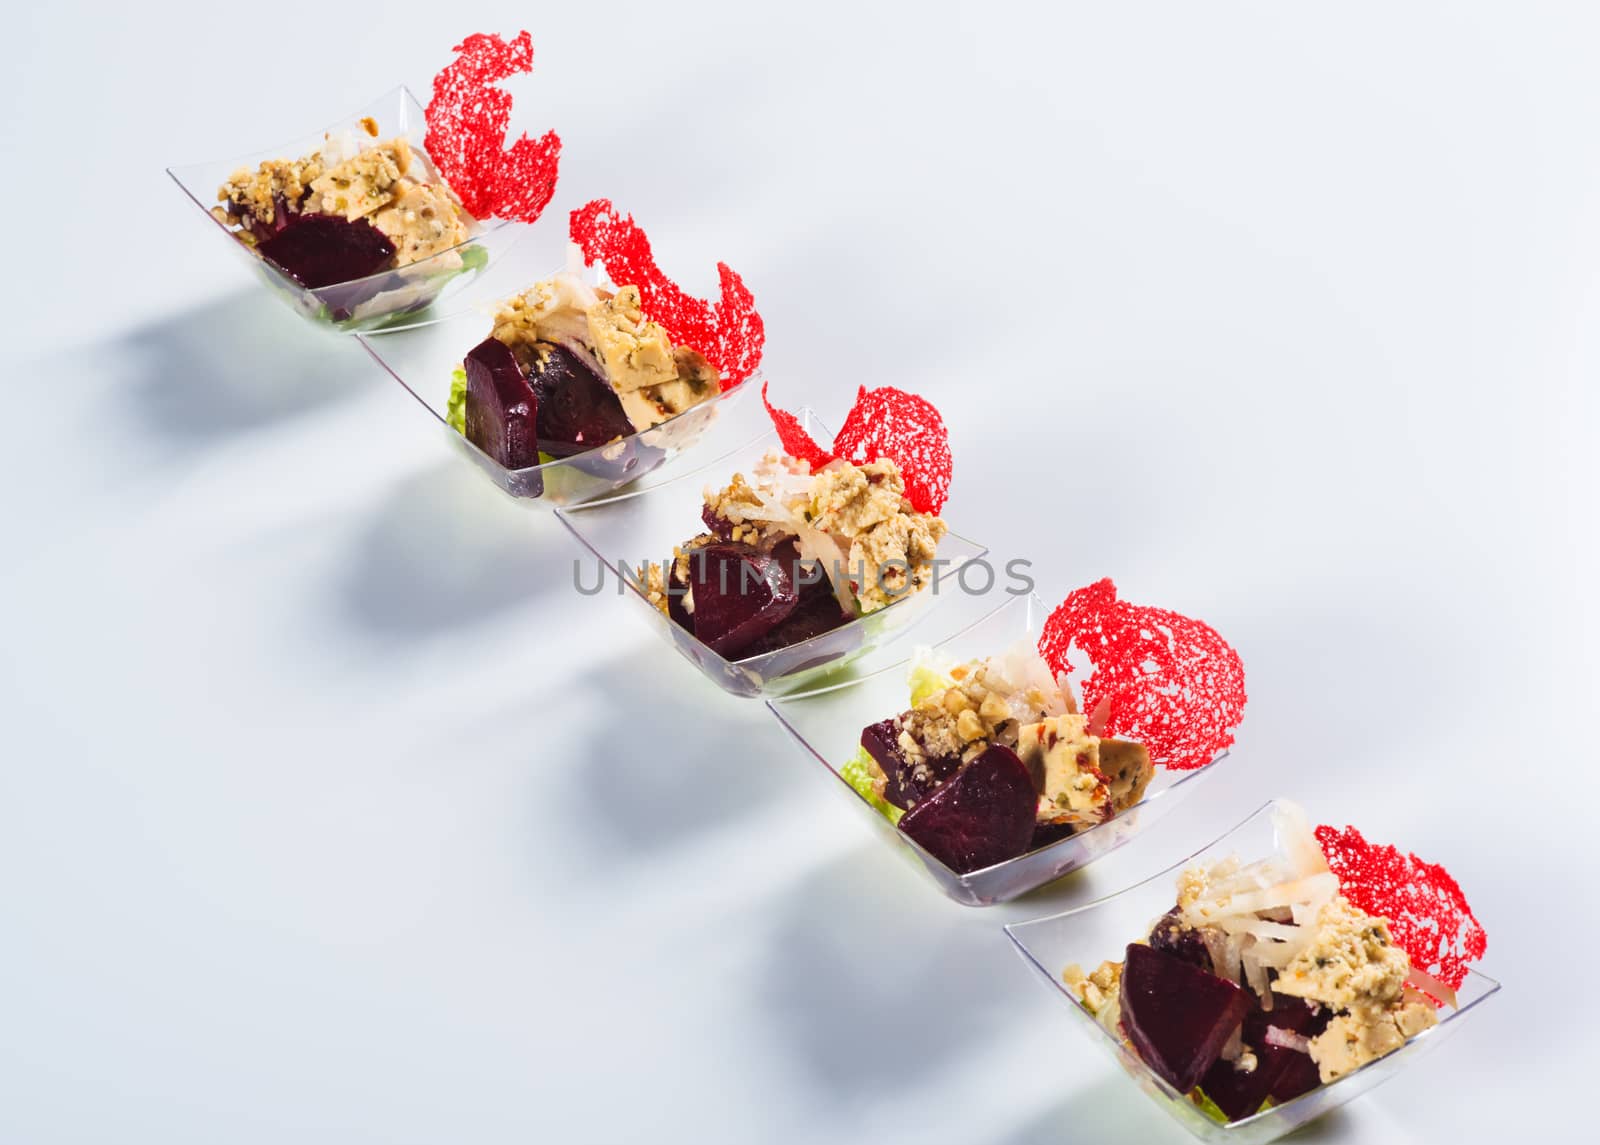 Salad with beet and cauliflower in glass on light background